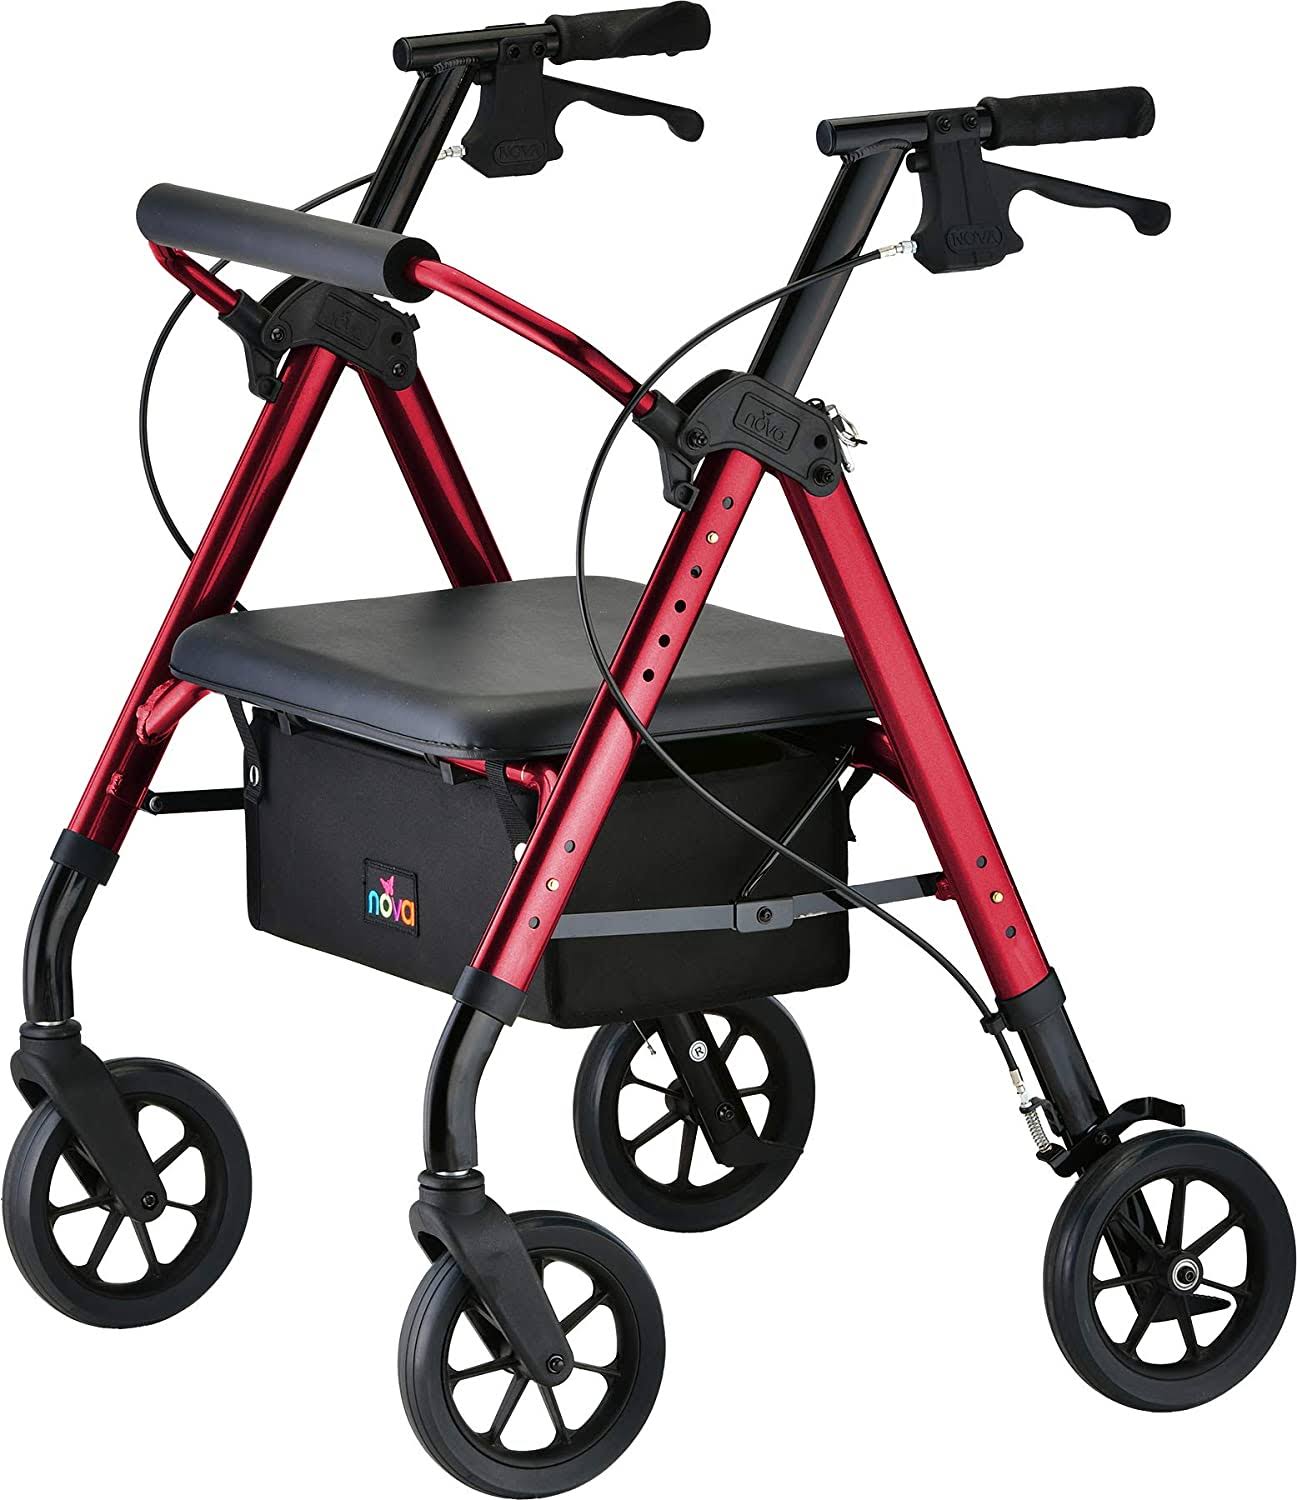 Nova Star Heavy Duty Rollator with Extra Wide Padded Seat, Red, 450 lbs.